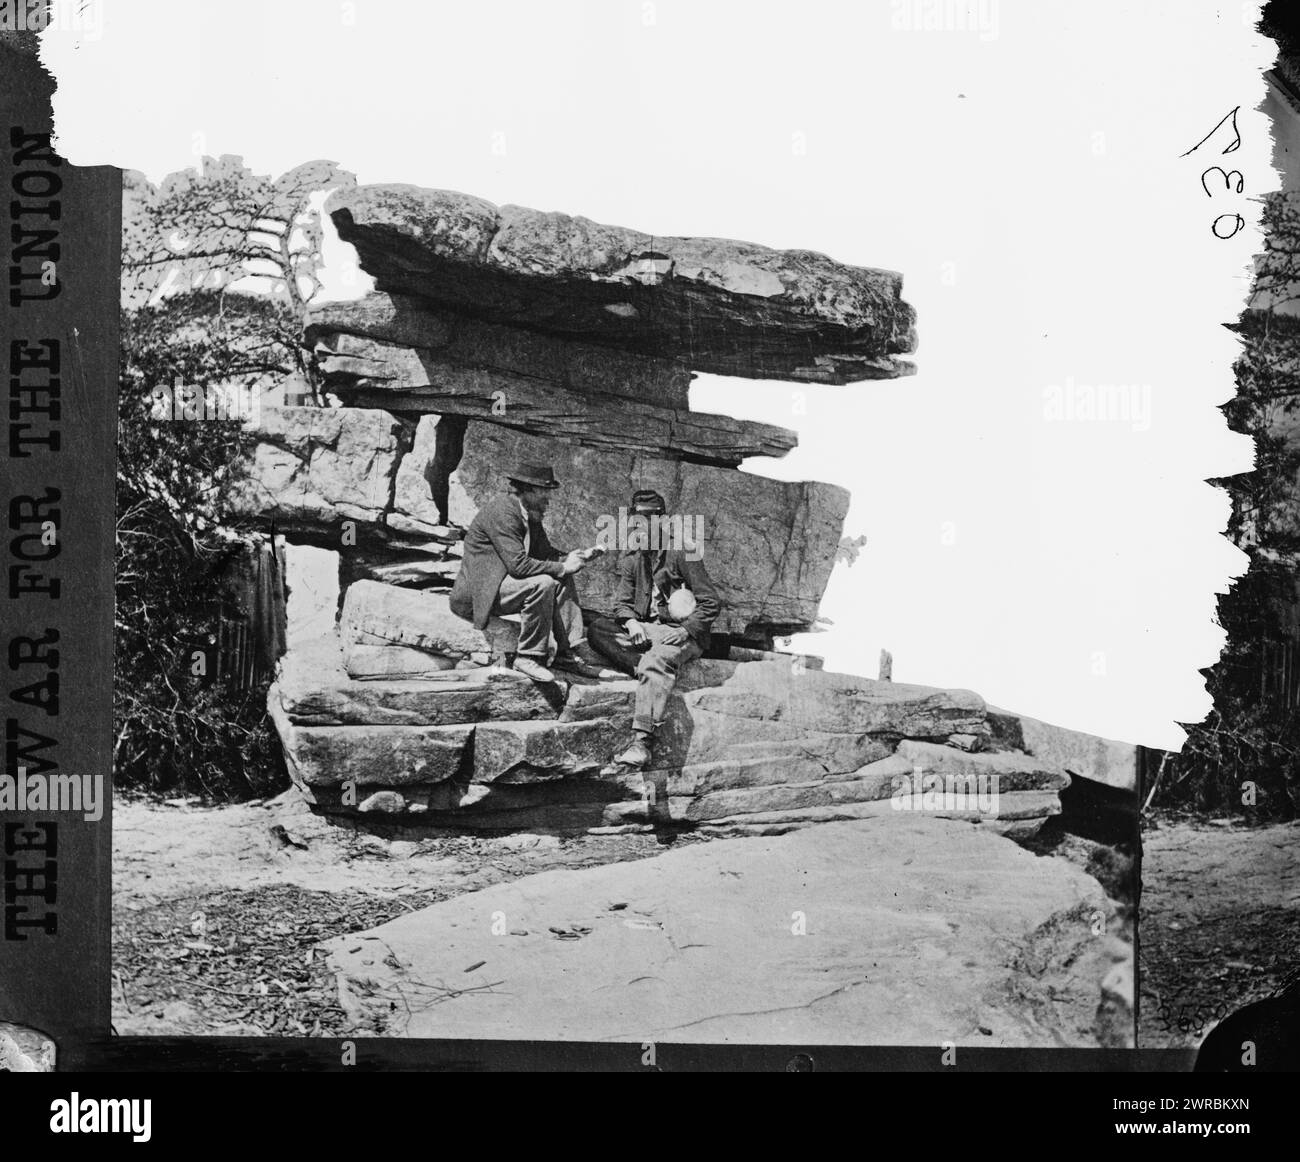 Chattanooga, Tenn., vicinity. Umbrella Rock on Lookout Mountain, Photograph of the War in the West. These photographs are of the Battle of Chattanooga, September-November 1863. After Rosecrans' debacle at Chickamauga, September 19-20, 1863, Bragg's army occupied the mountains that ring about the vital railroad center of Chattanooga. Grant, brought in to save the situation, steadily built up offensive strength, and on November 23-25, burst the blockade in a series of brilliantly executed attacks. The photographs Stock Photo